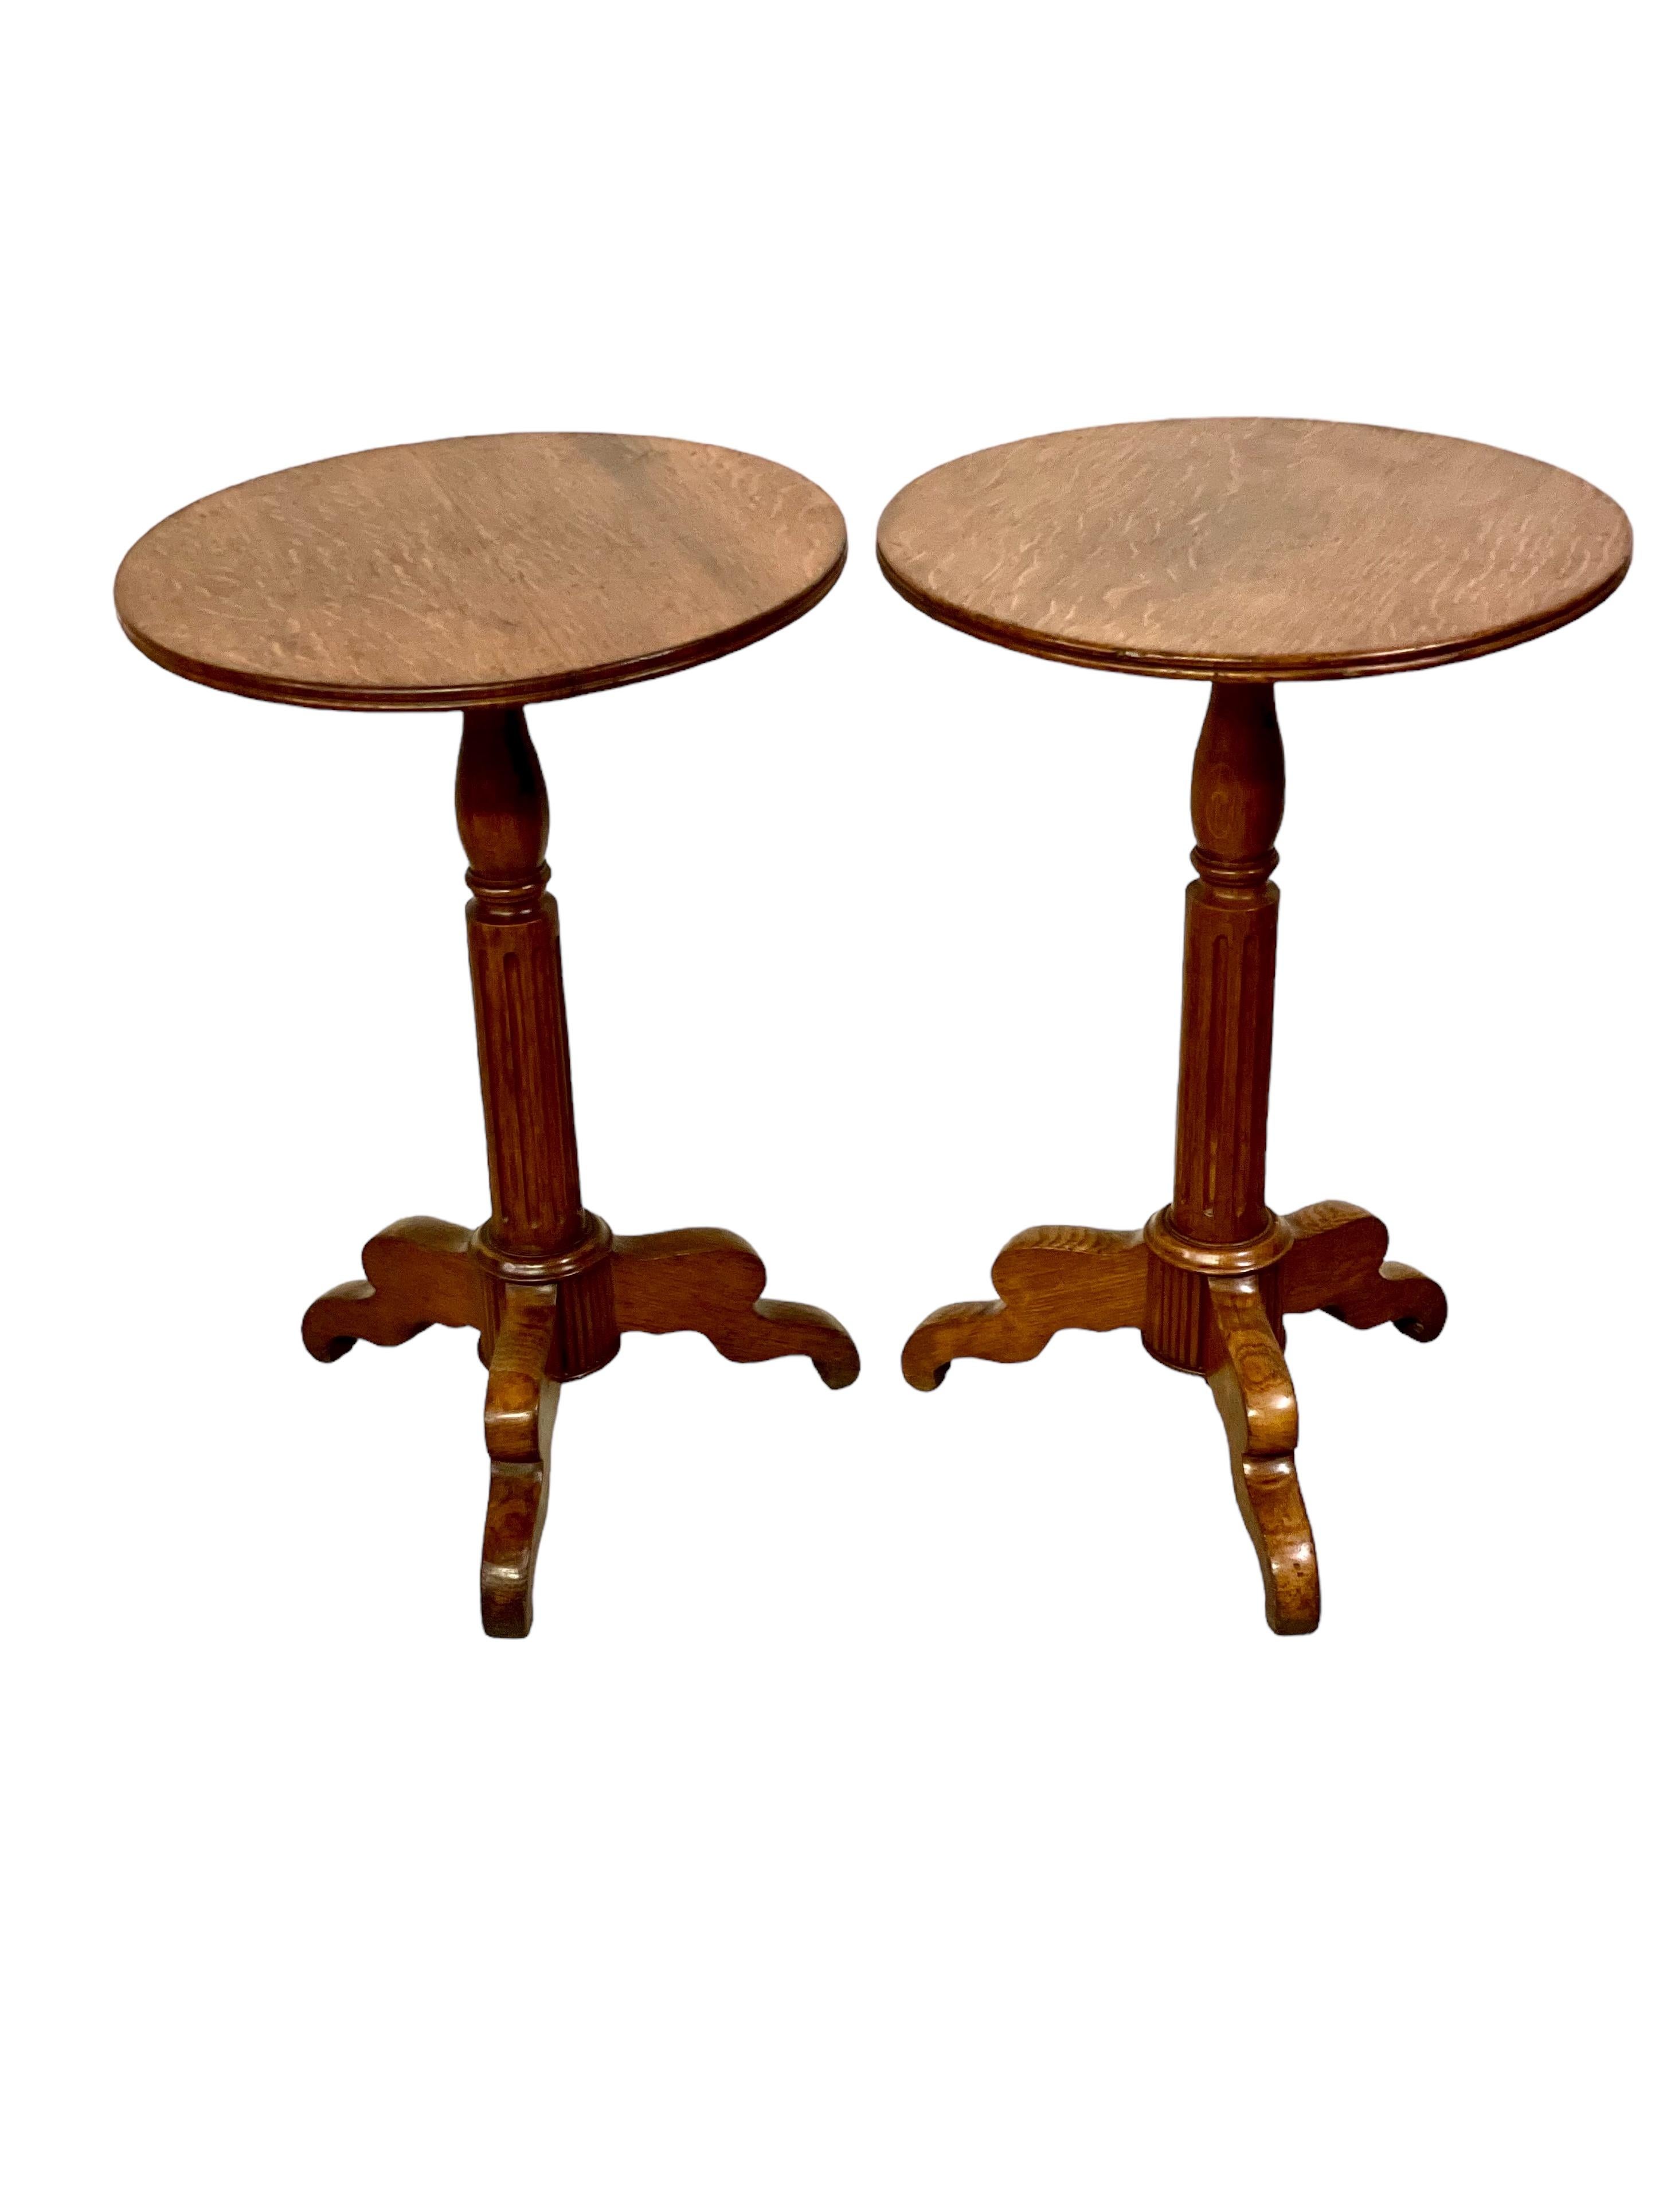 A charming pair of 19th century French occasional, or side, tables in walnut. These beautifully polished and supremely practical 'guéridon' tables each feature a one-piece circular top with a moulded edge, and sit above a central turned and fluted